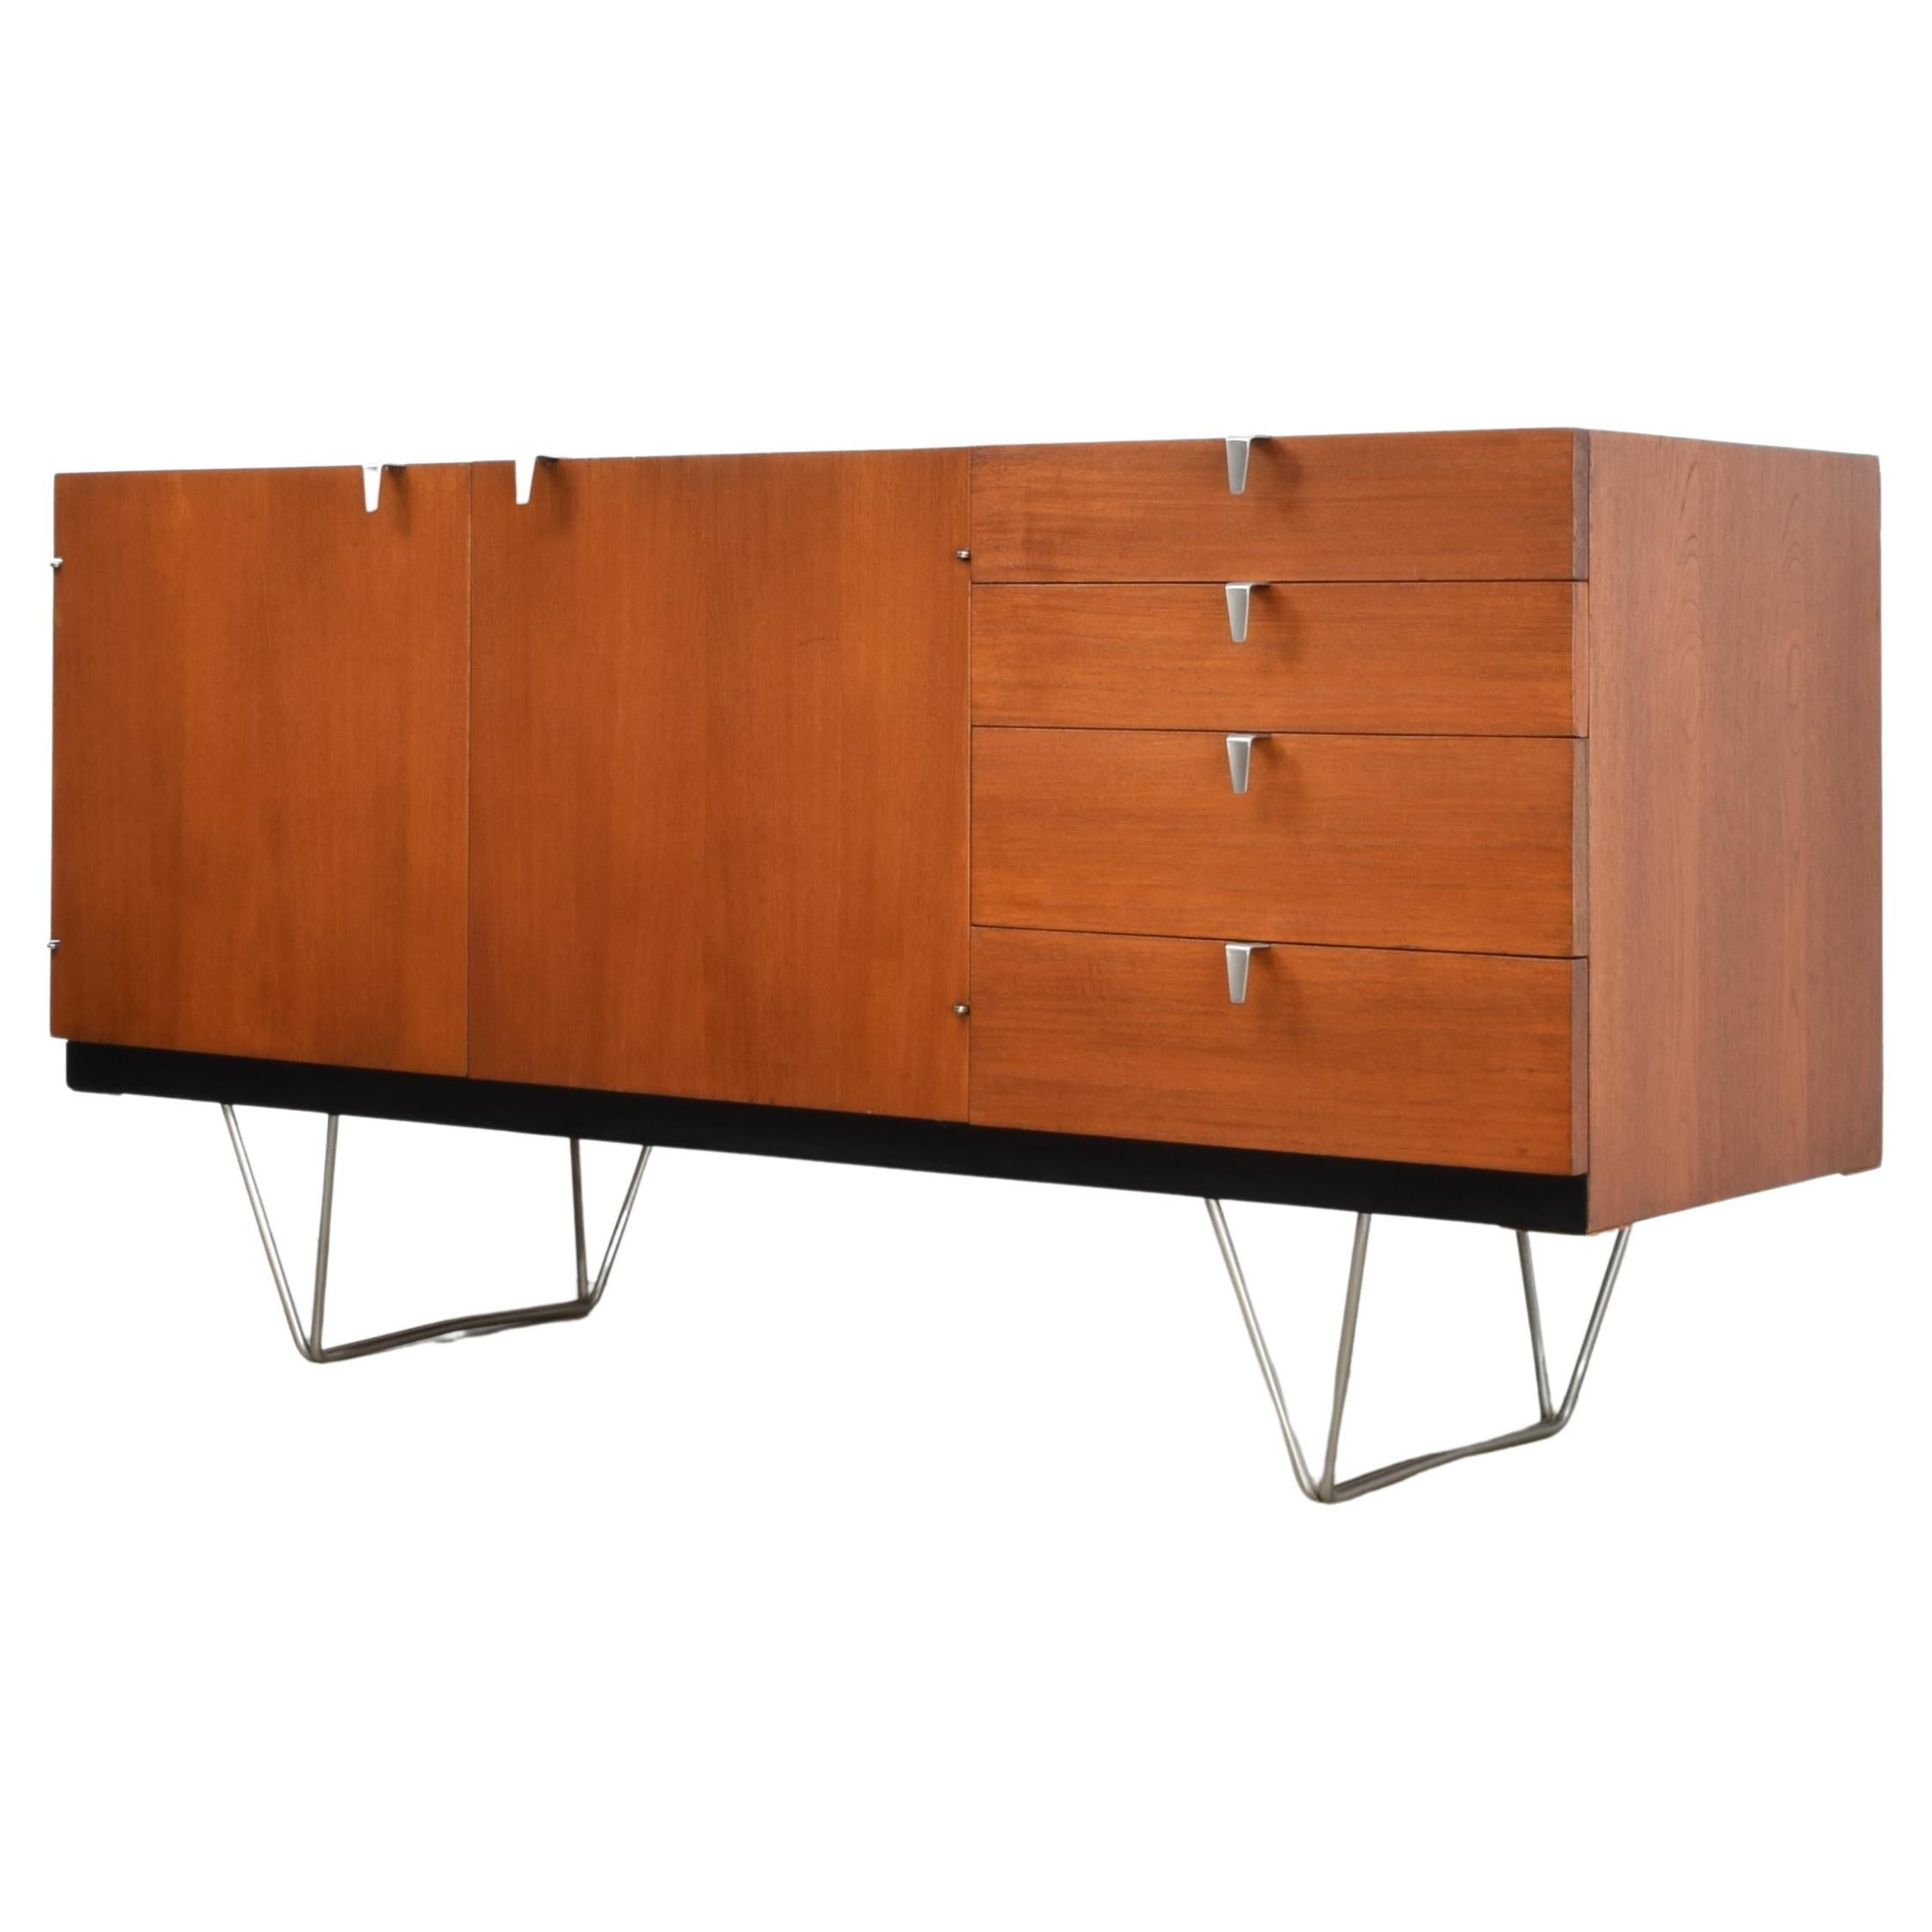 John & Sylvia Reid for Stag Furniture S-Range Sideboard, 1960s, Super Condition